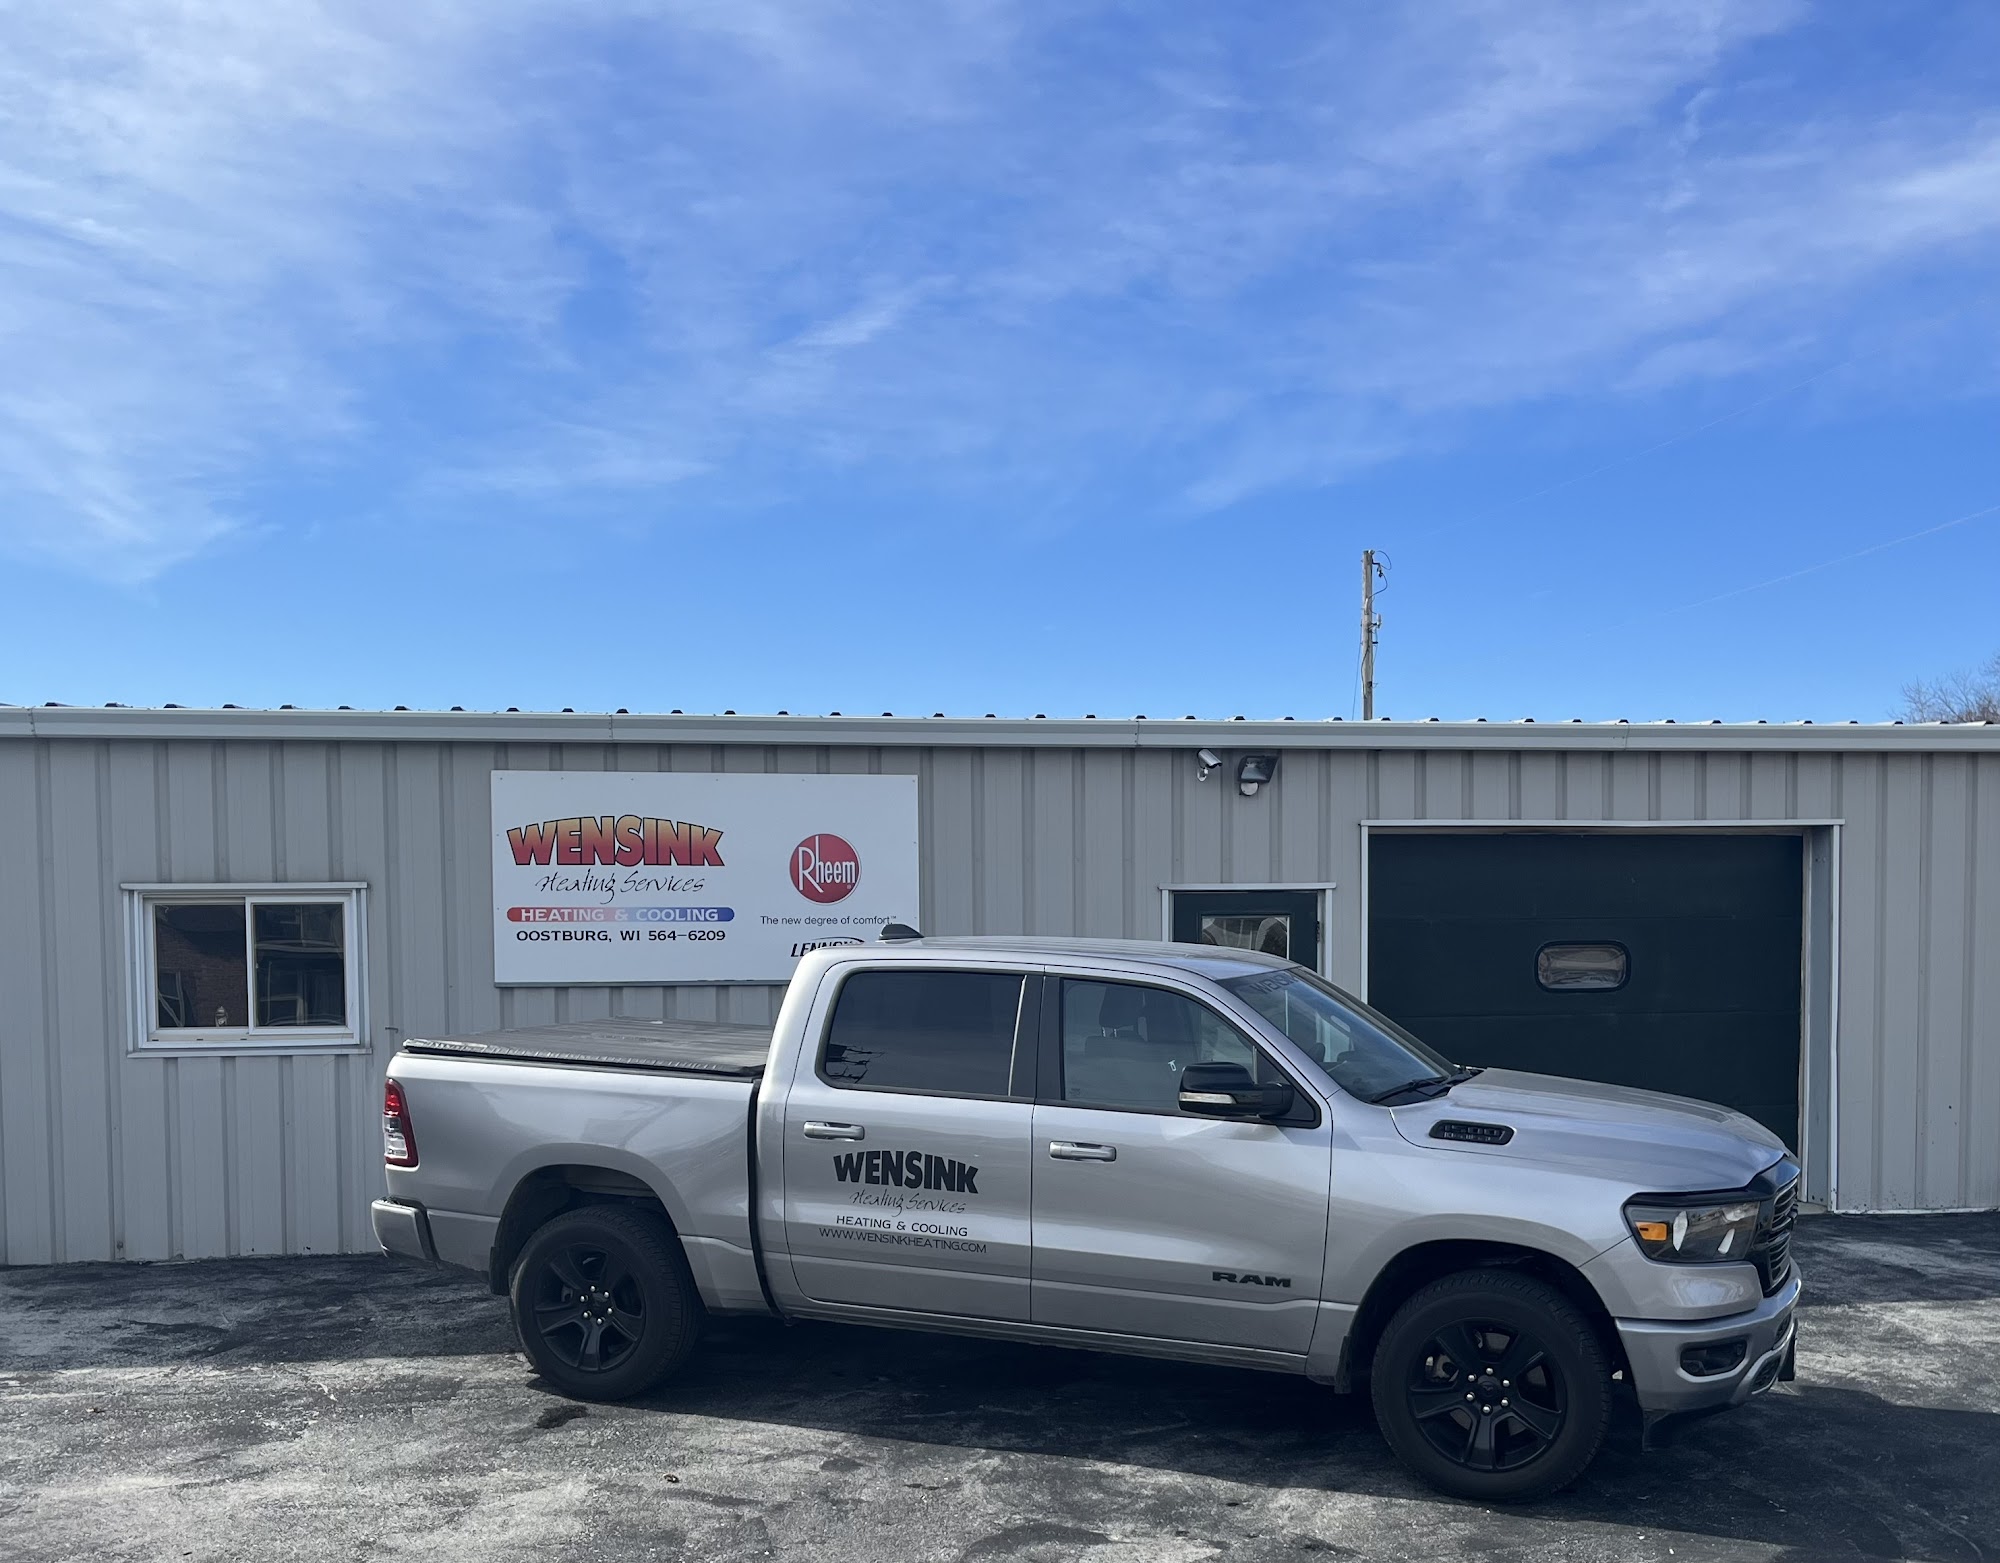 Wensink Heating & Cooling Services Inc